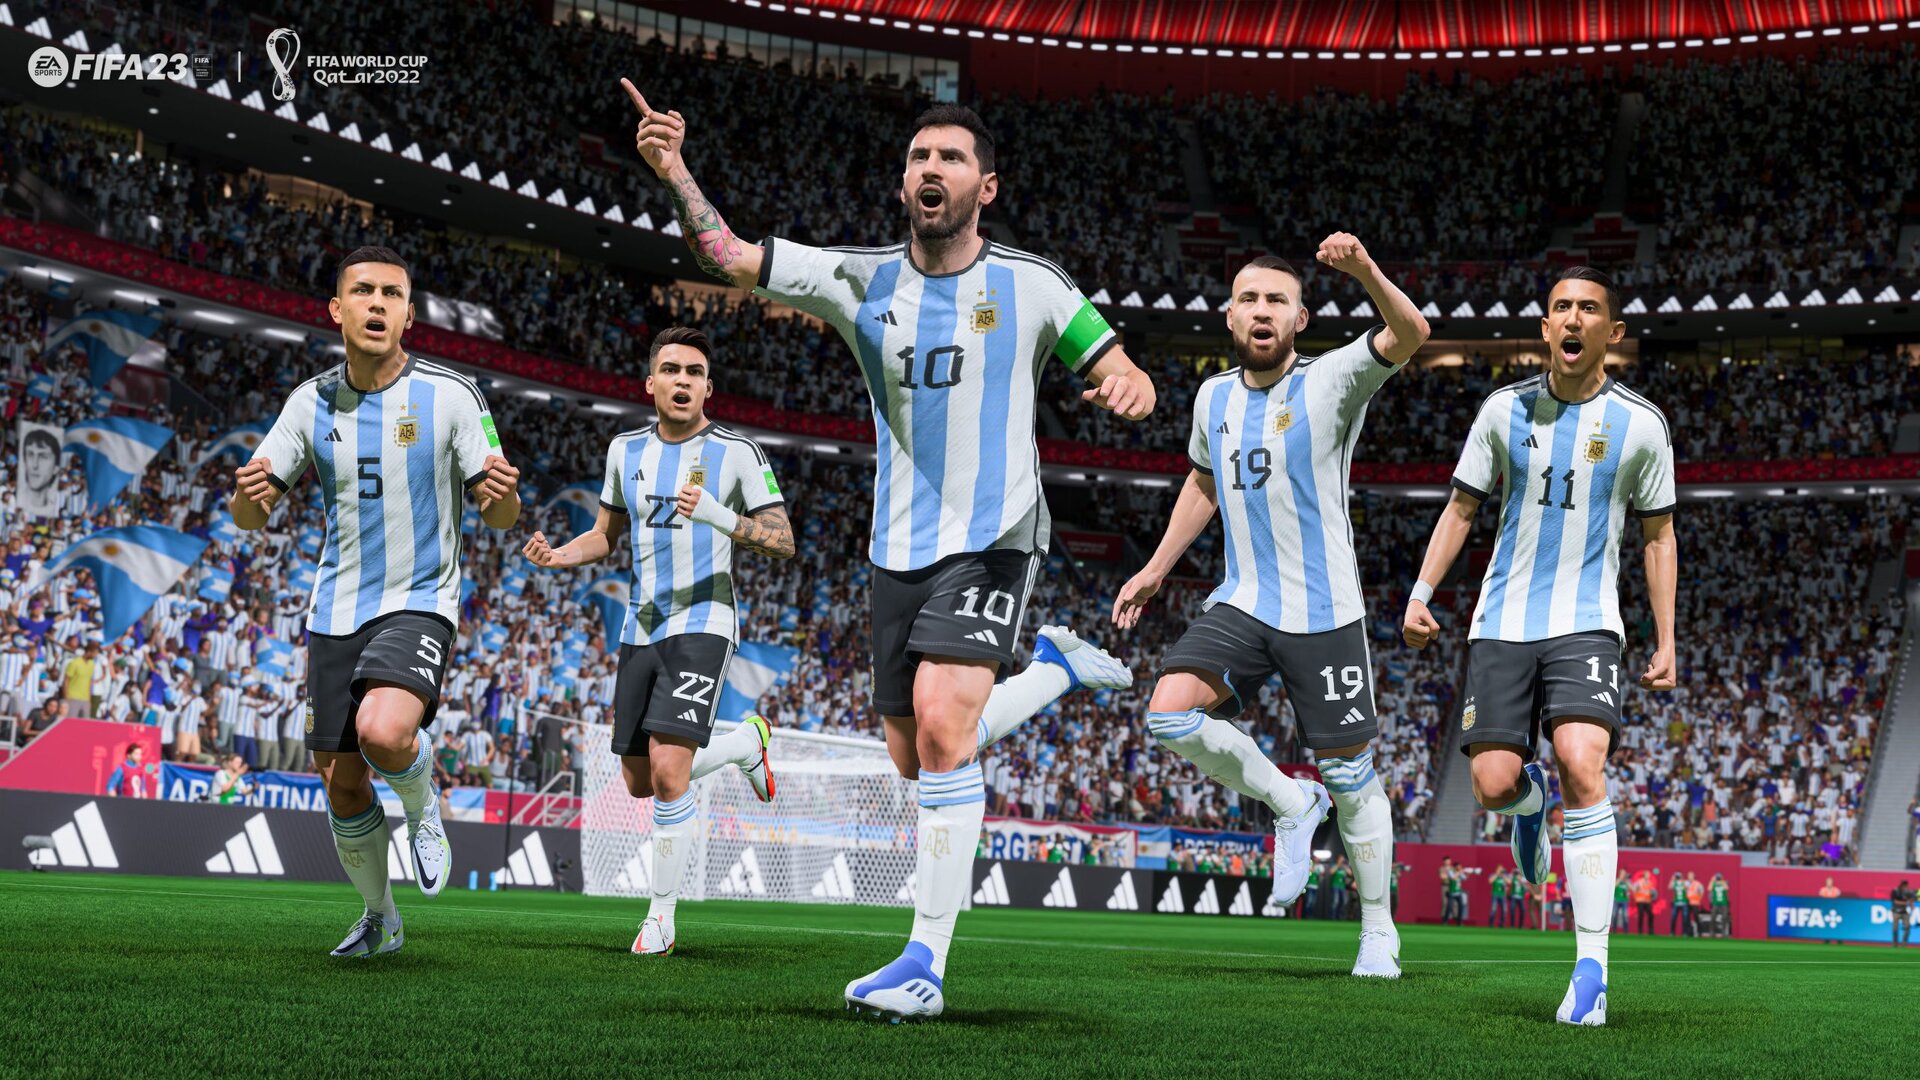 EA Sports predicts Lionel Messi's Argentina will win the World Cup after a FIFA 23 simulation